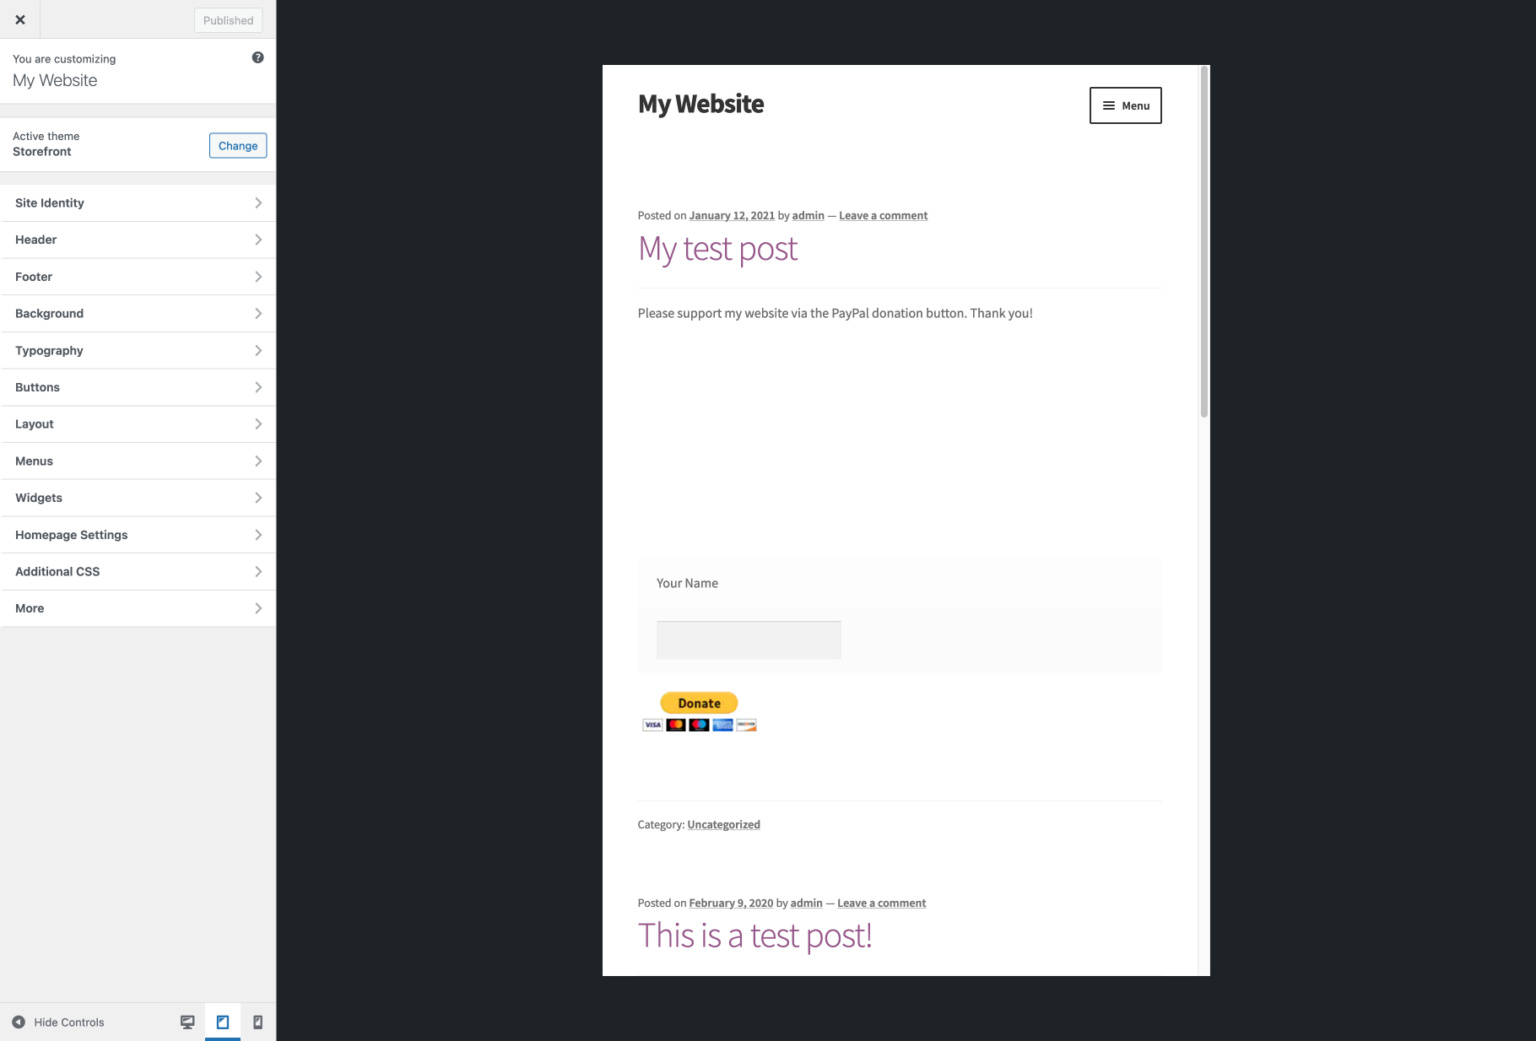 responsive mobile and tablet preview of worpdress from desktop